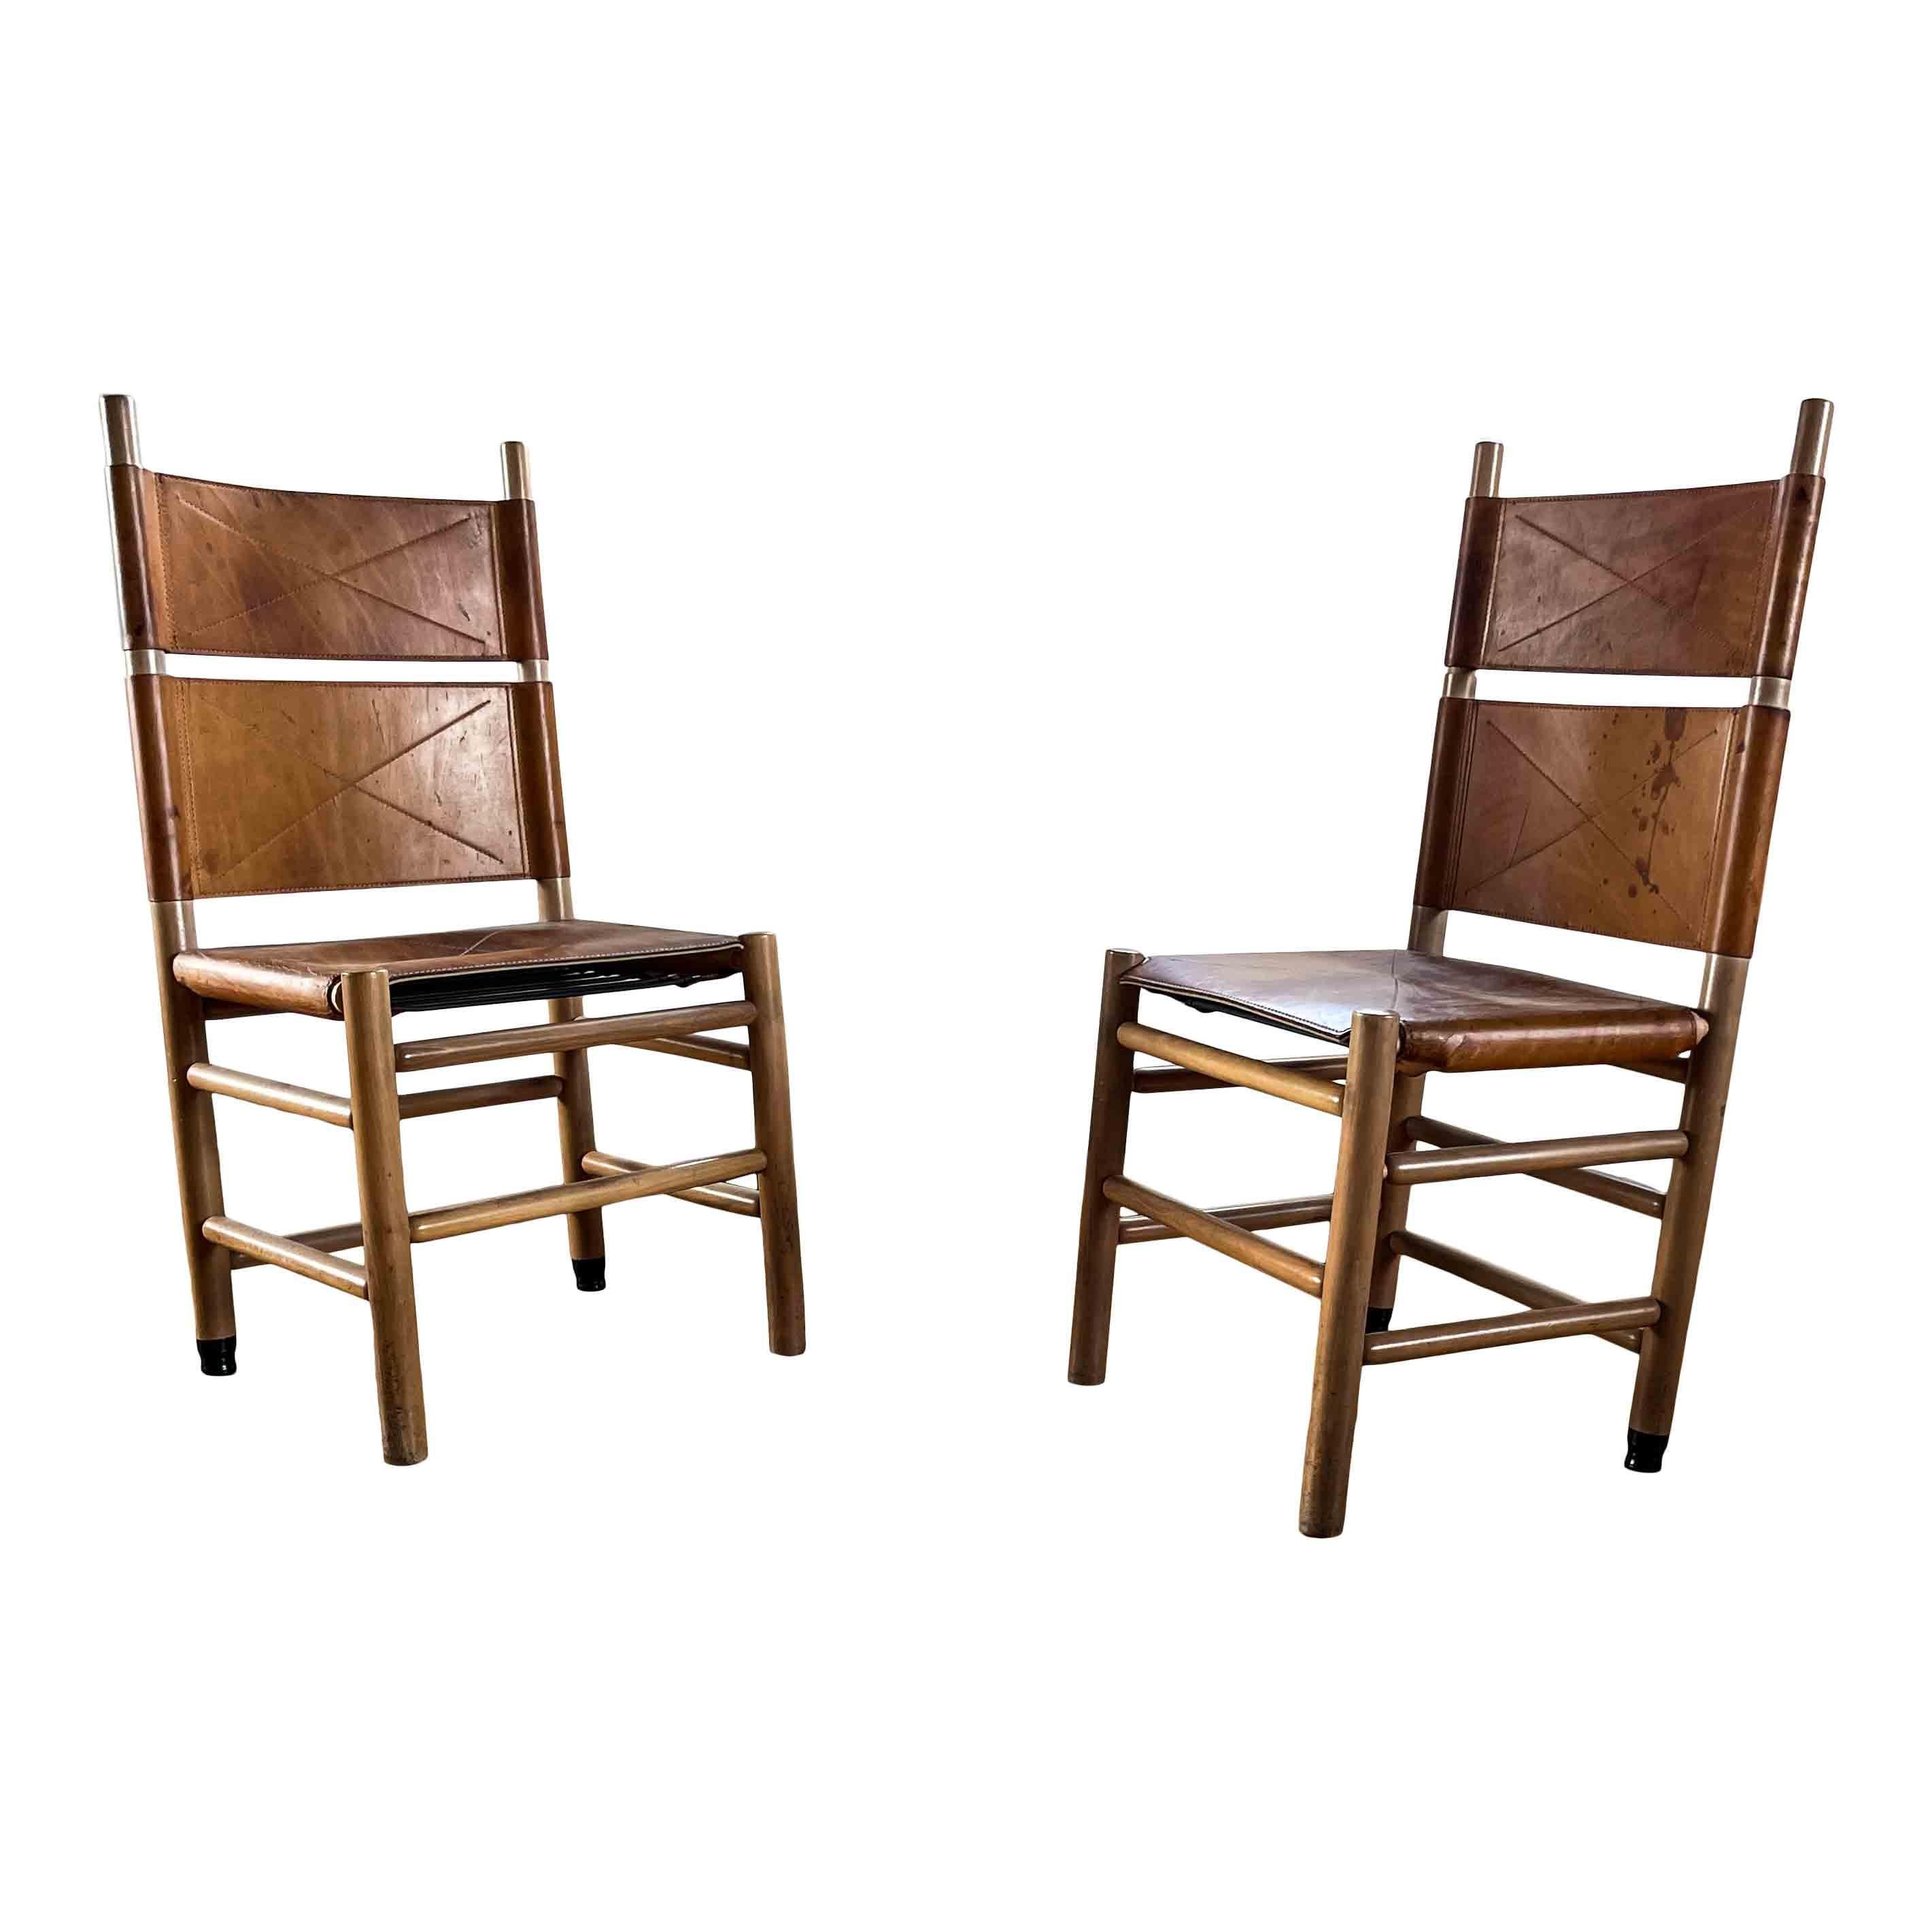 Carlo Scarpa Cognac Leather “Kentucky” Dining Chair for Bernini, 1977, Set of 5 For Sale 7